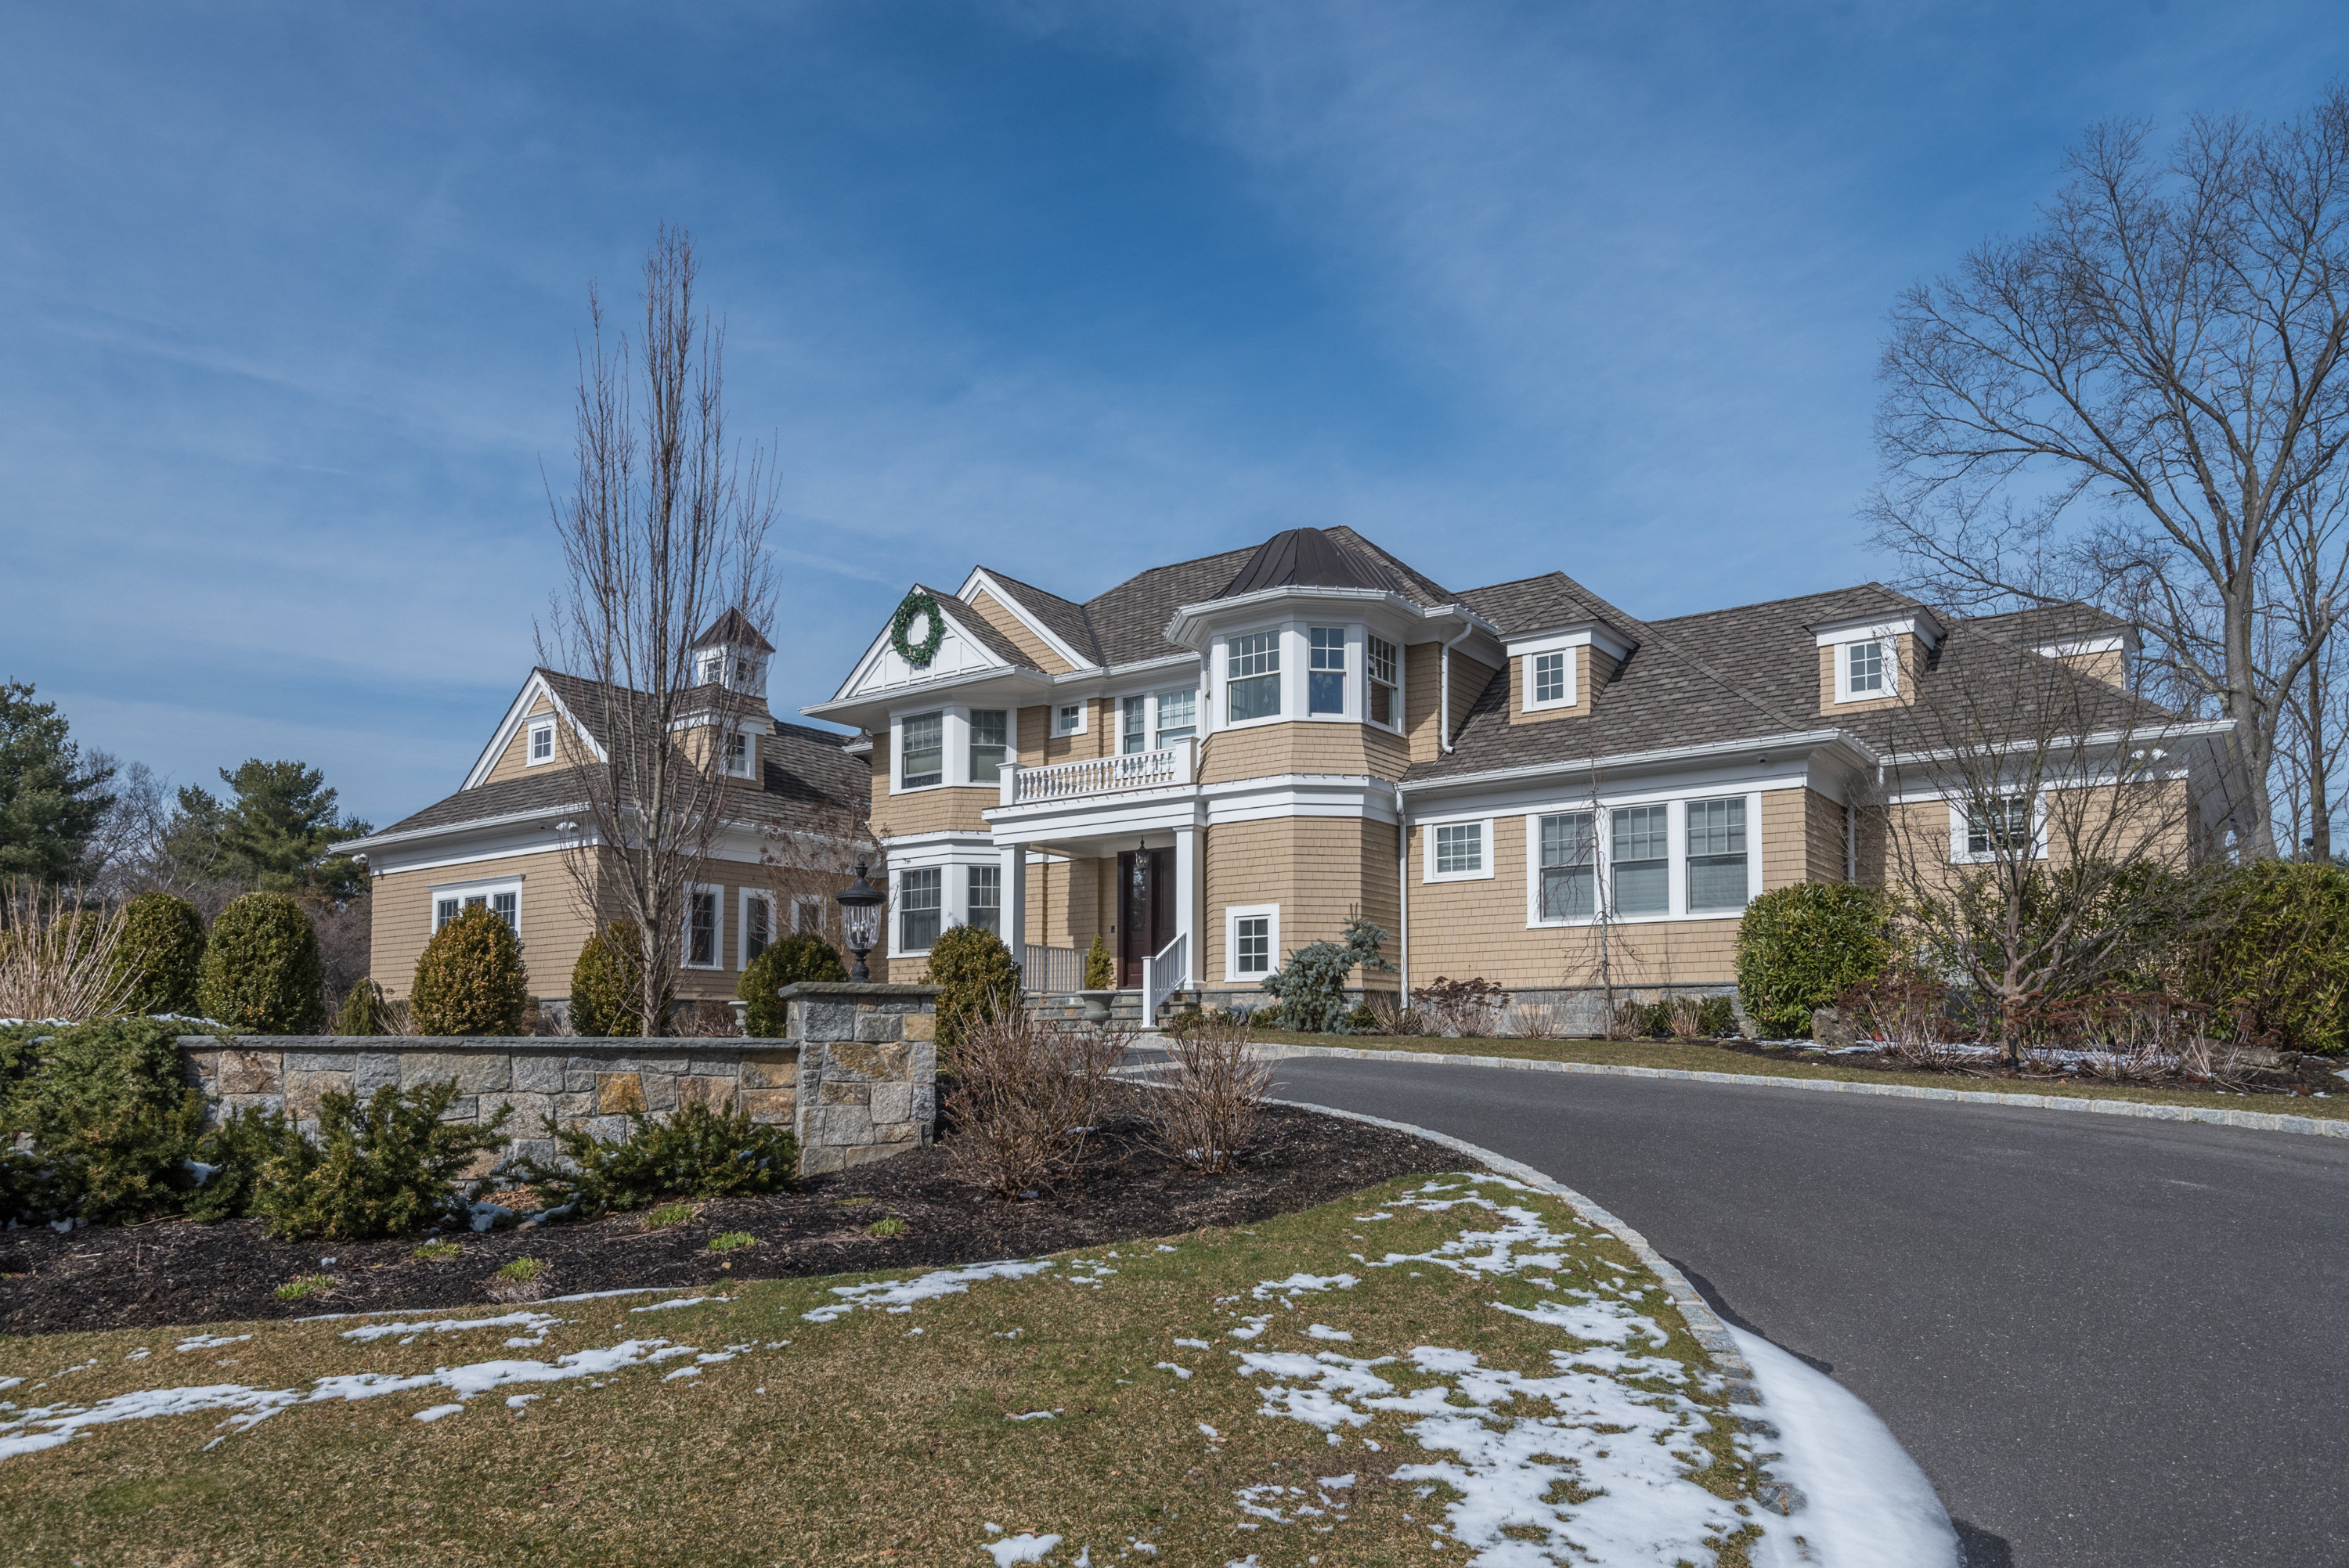 Just Sold!  Magnificent Hampton-style Colonial in Oyster Bay Cove